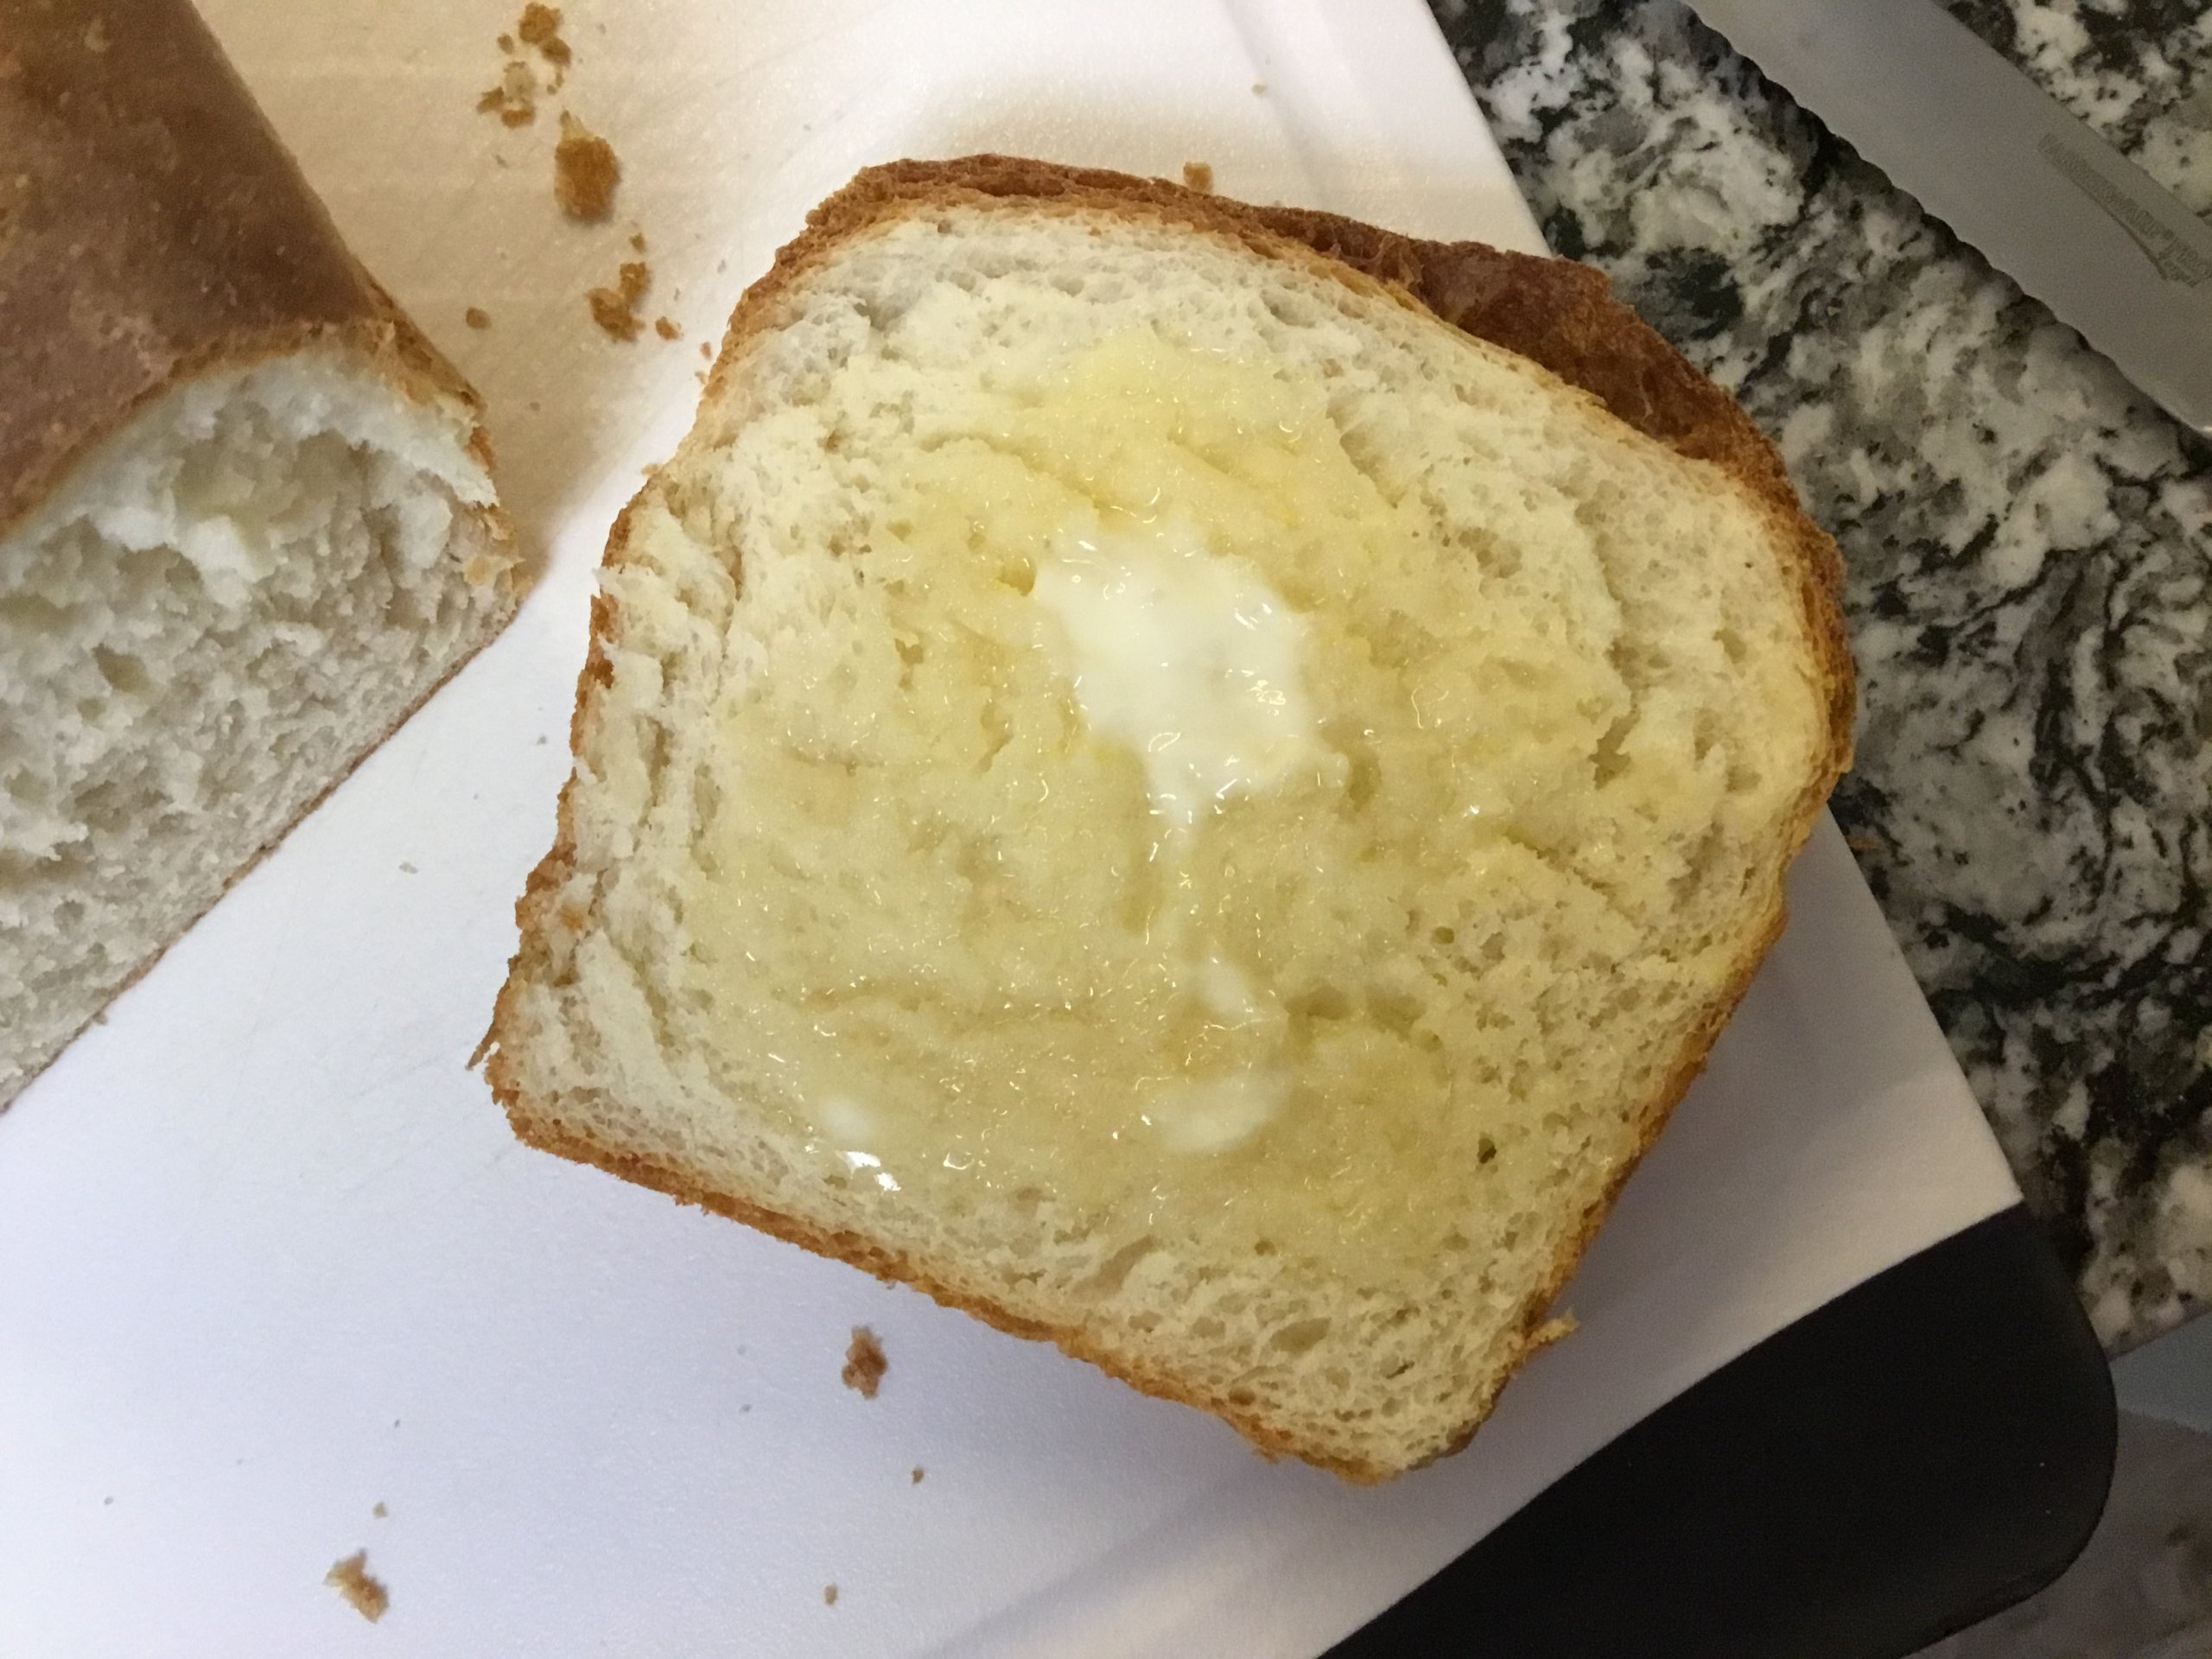 Homemade bread with butter